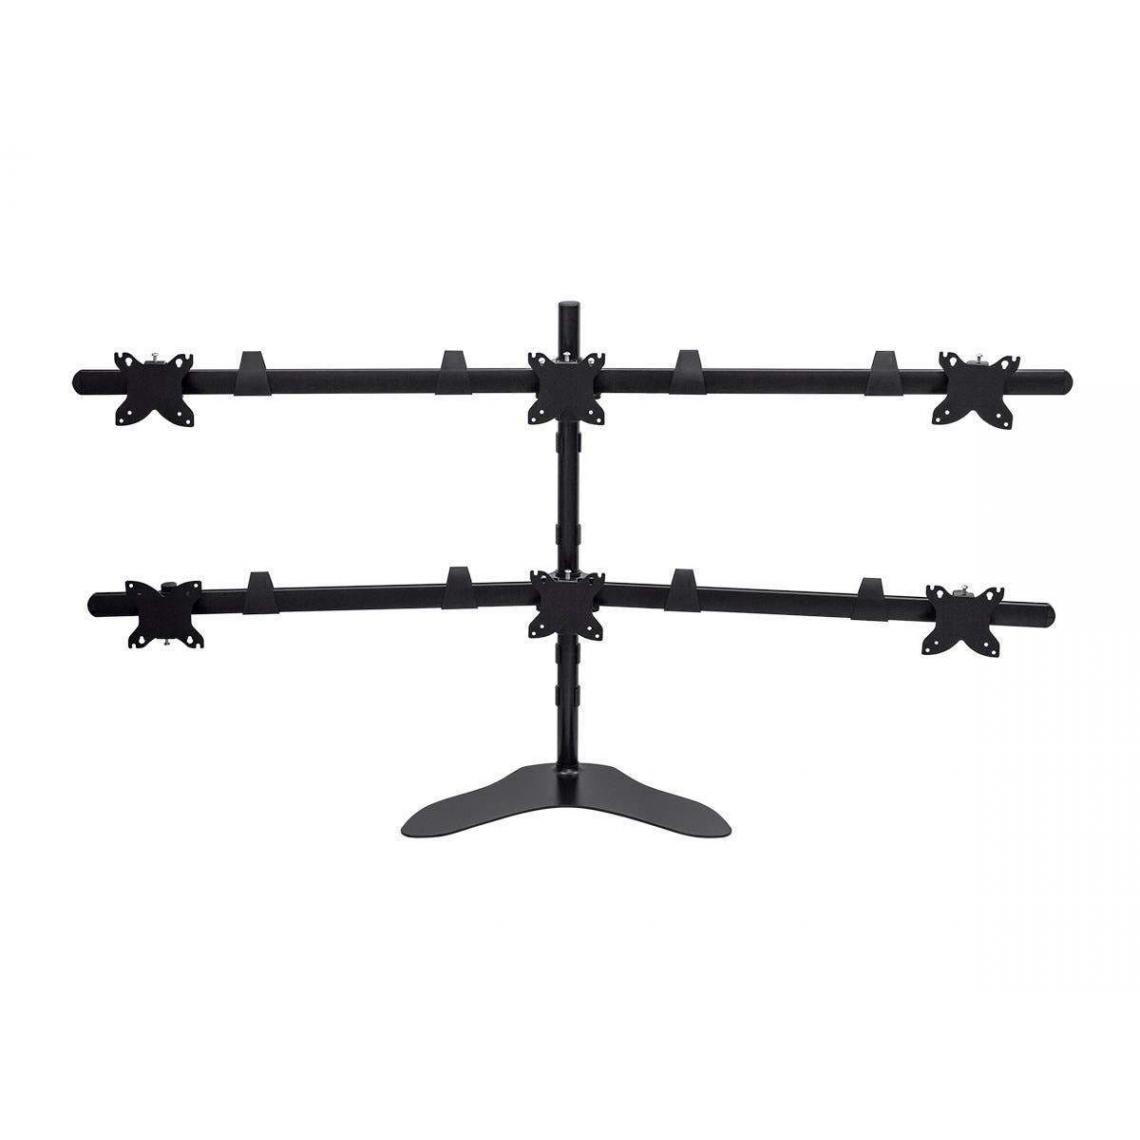 Monoprice - Hex (6) Monitor Free Standing Desk Mount for 15-30 Inch Monitors - Support et Bras